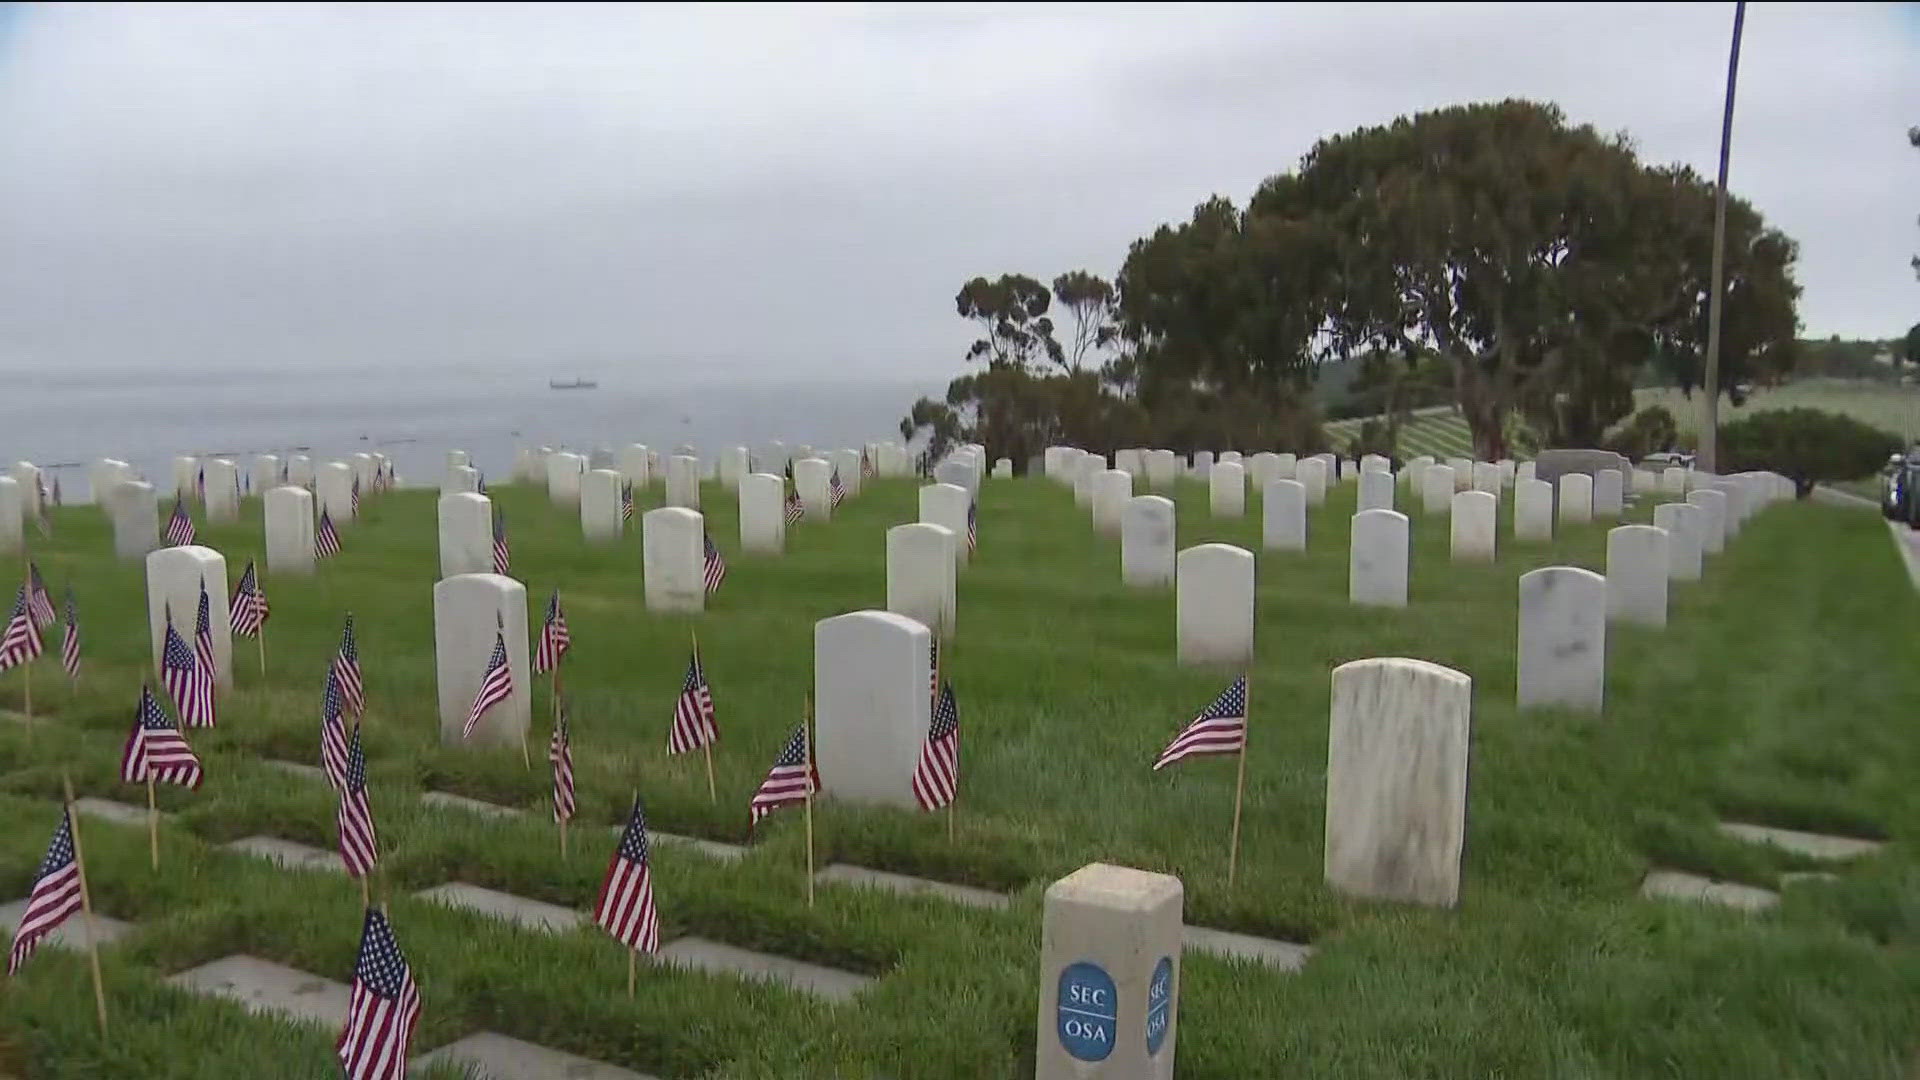 Monday marked the 124th consecutive Memorial Day service at Fort Rosecrans, where families honored the men and women who made the ultimate sacrifice.